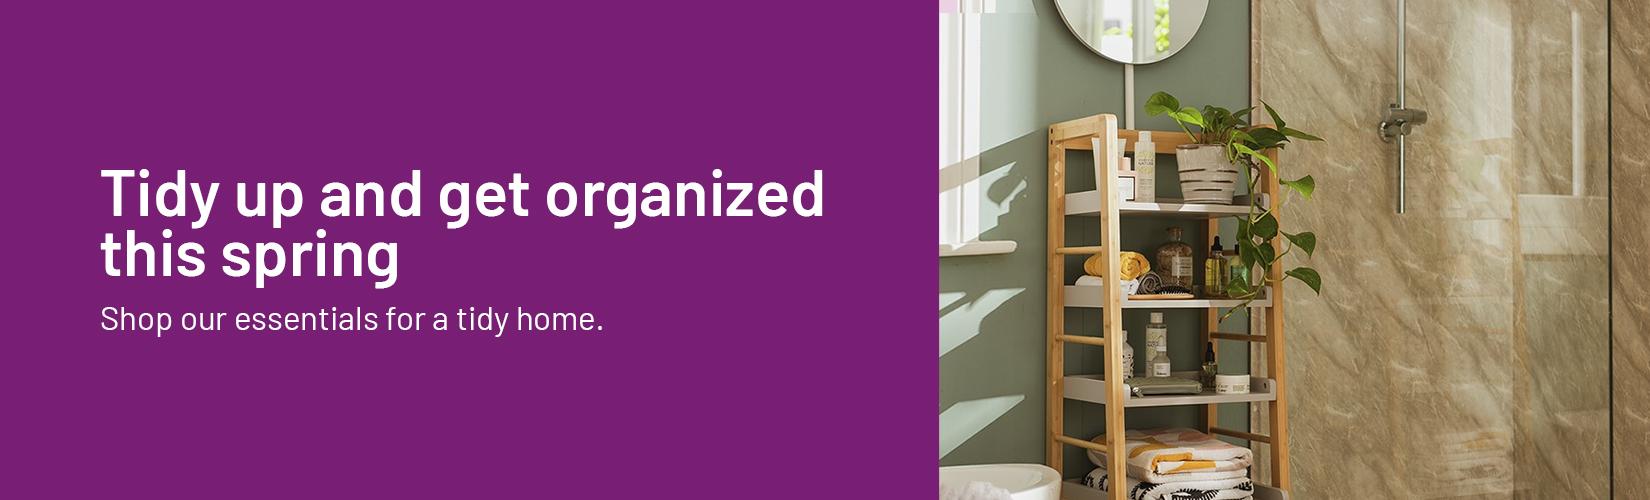 Tidy up and get organized this Spring. Shop our essentials for a tidy home.